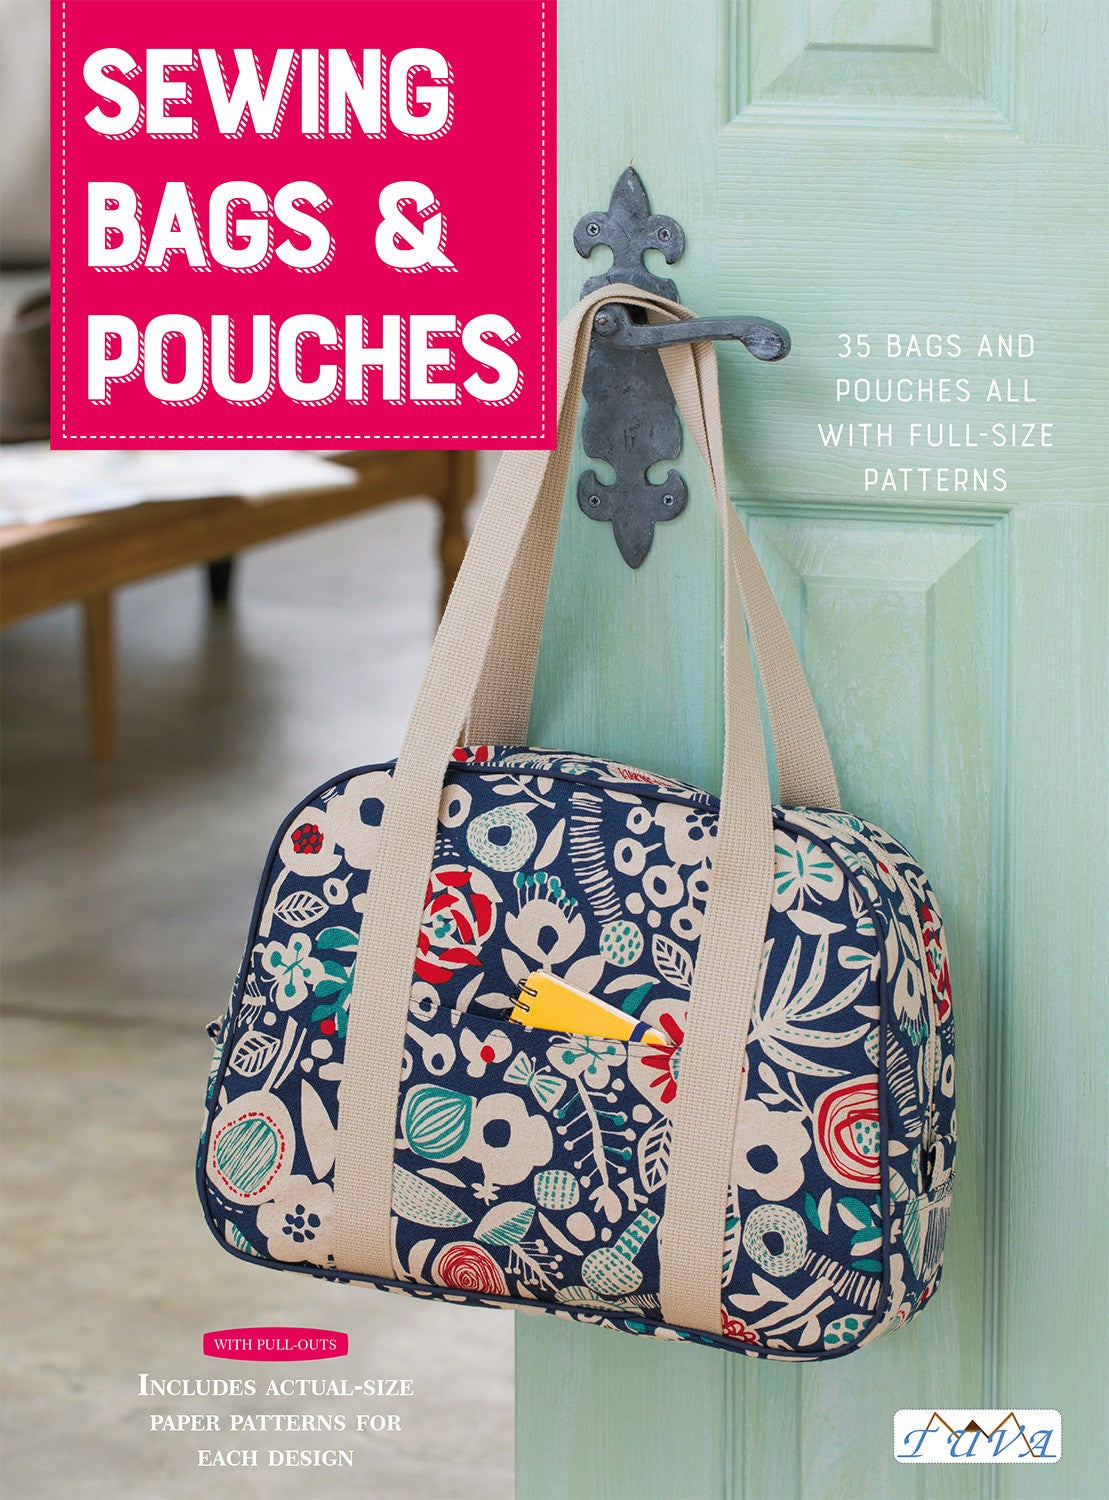 Bags & Pouches